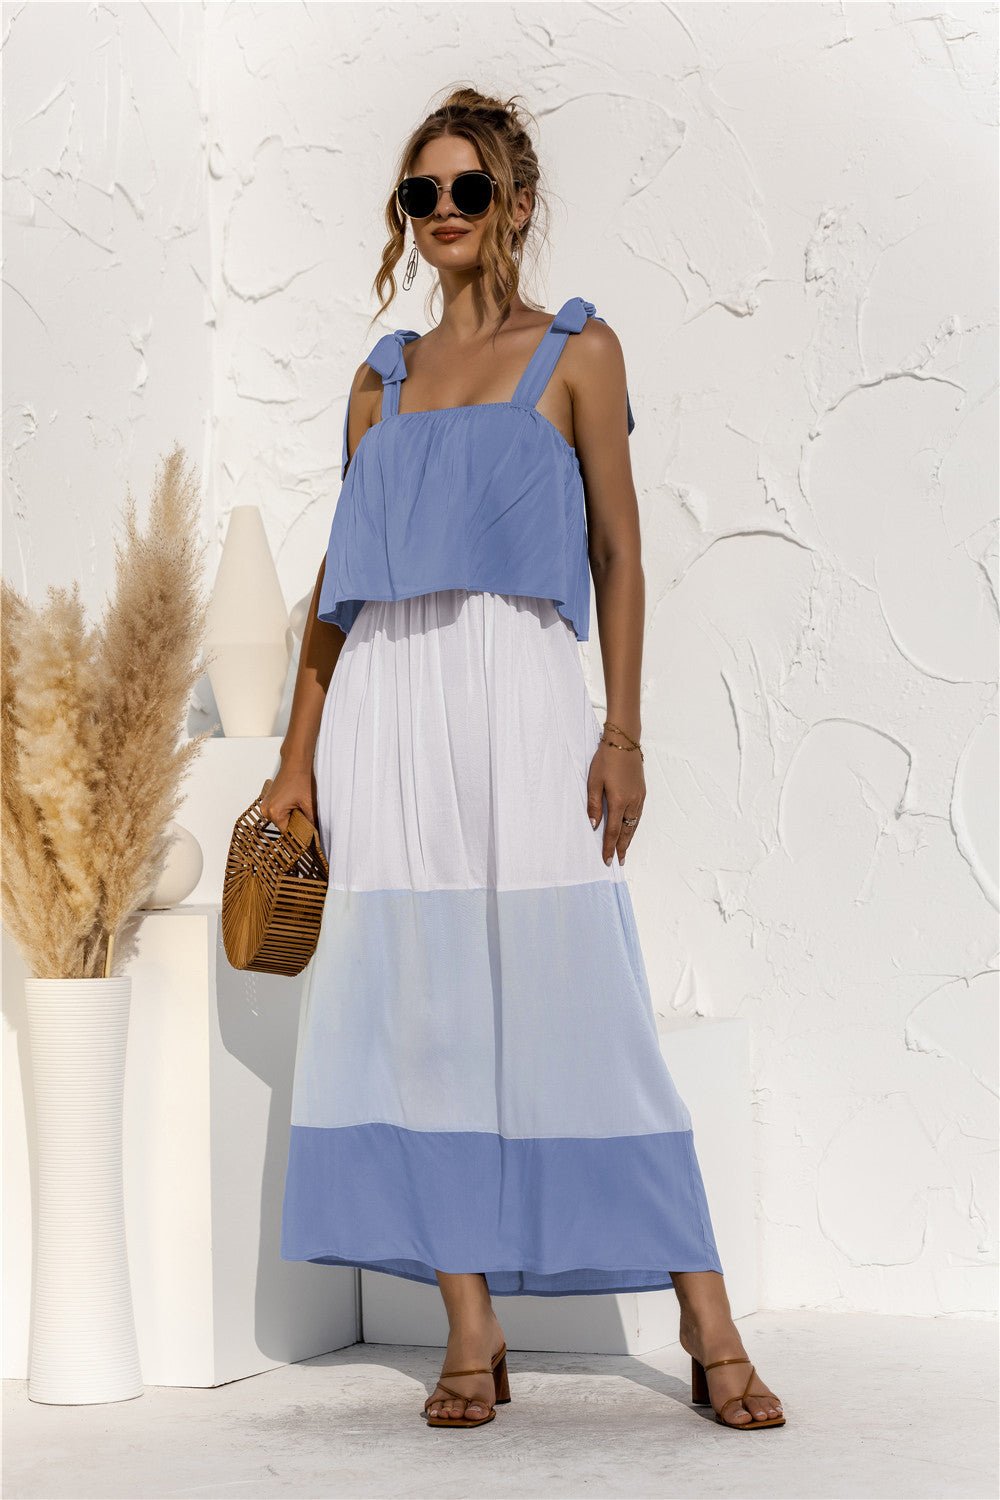 Color Blocked Maxi Dress - blue white and light blue color block dress with top overlay  #Firefly Lane Boutique1